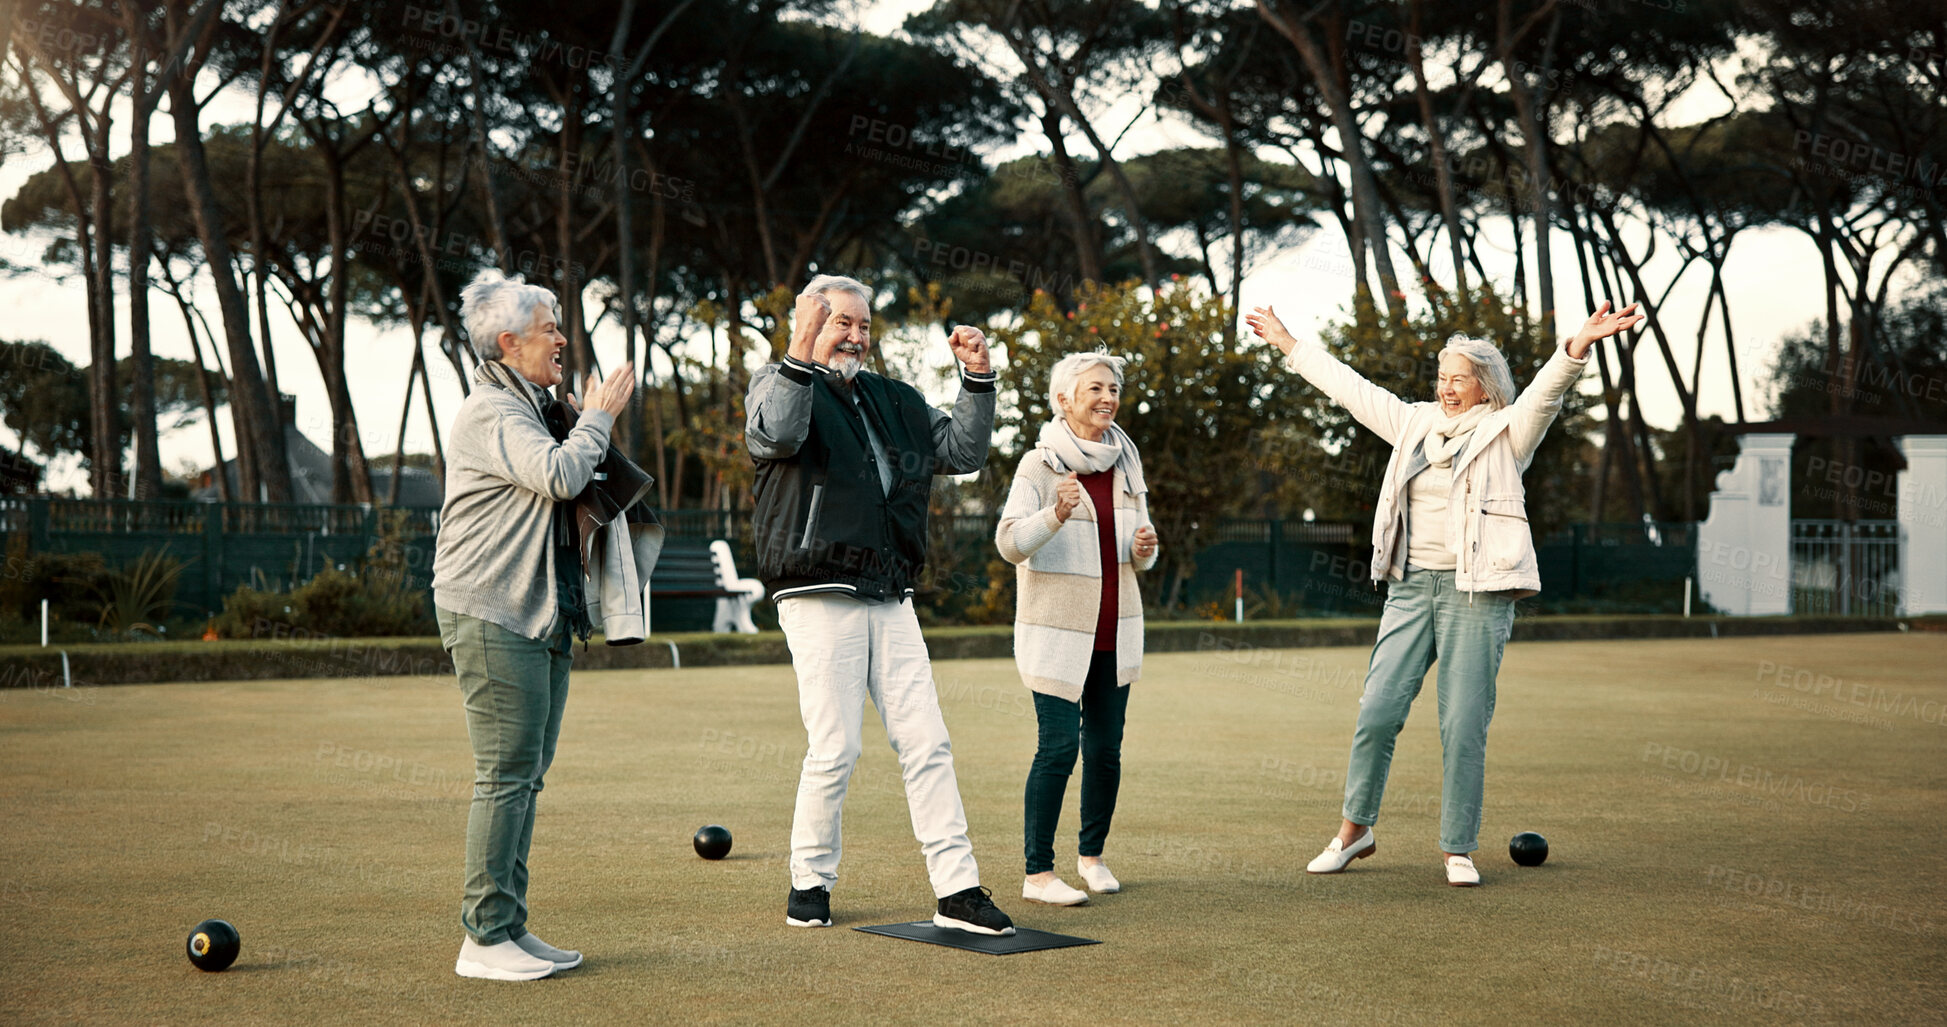 Buy stock photo Bowls, applause and celebration with senior friends outdoor, cheering together during a game. Motivation, support or community and a group of elderly people cheering while having fun with a hobby